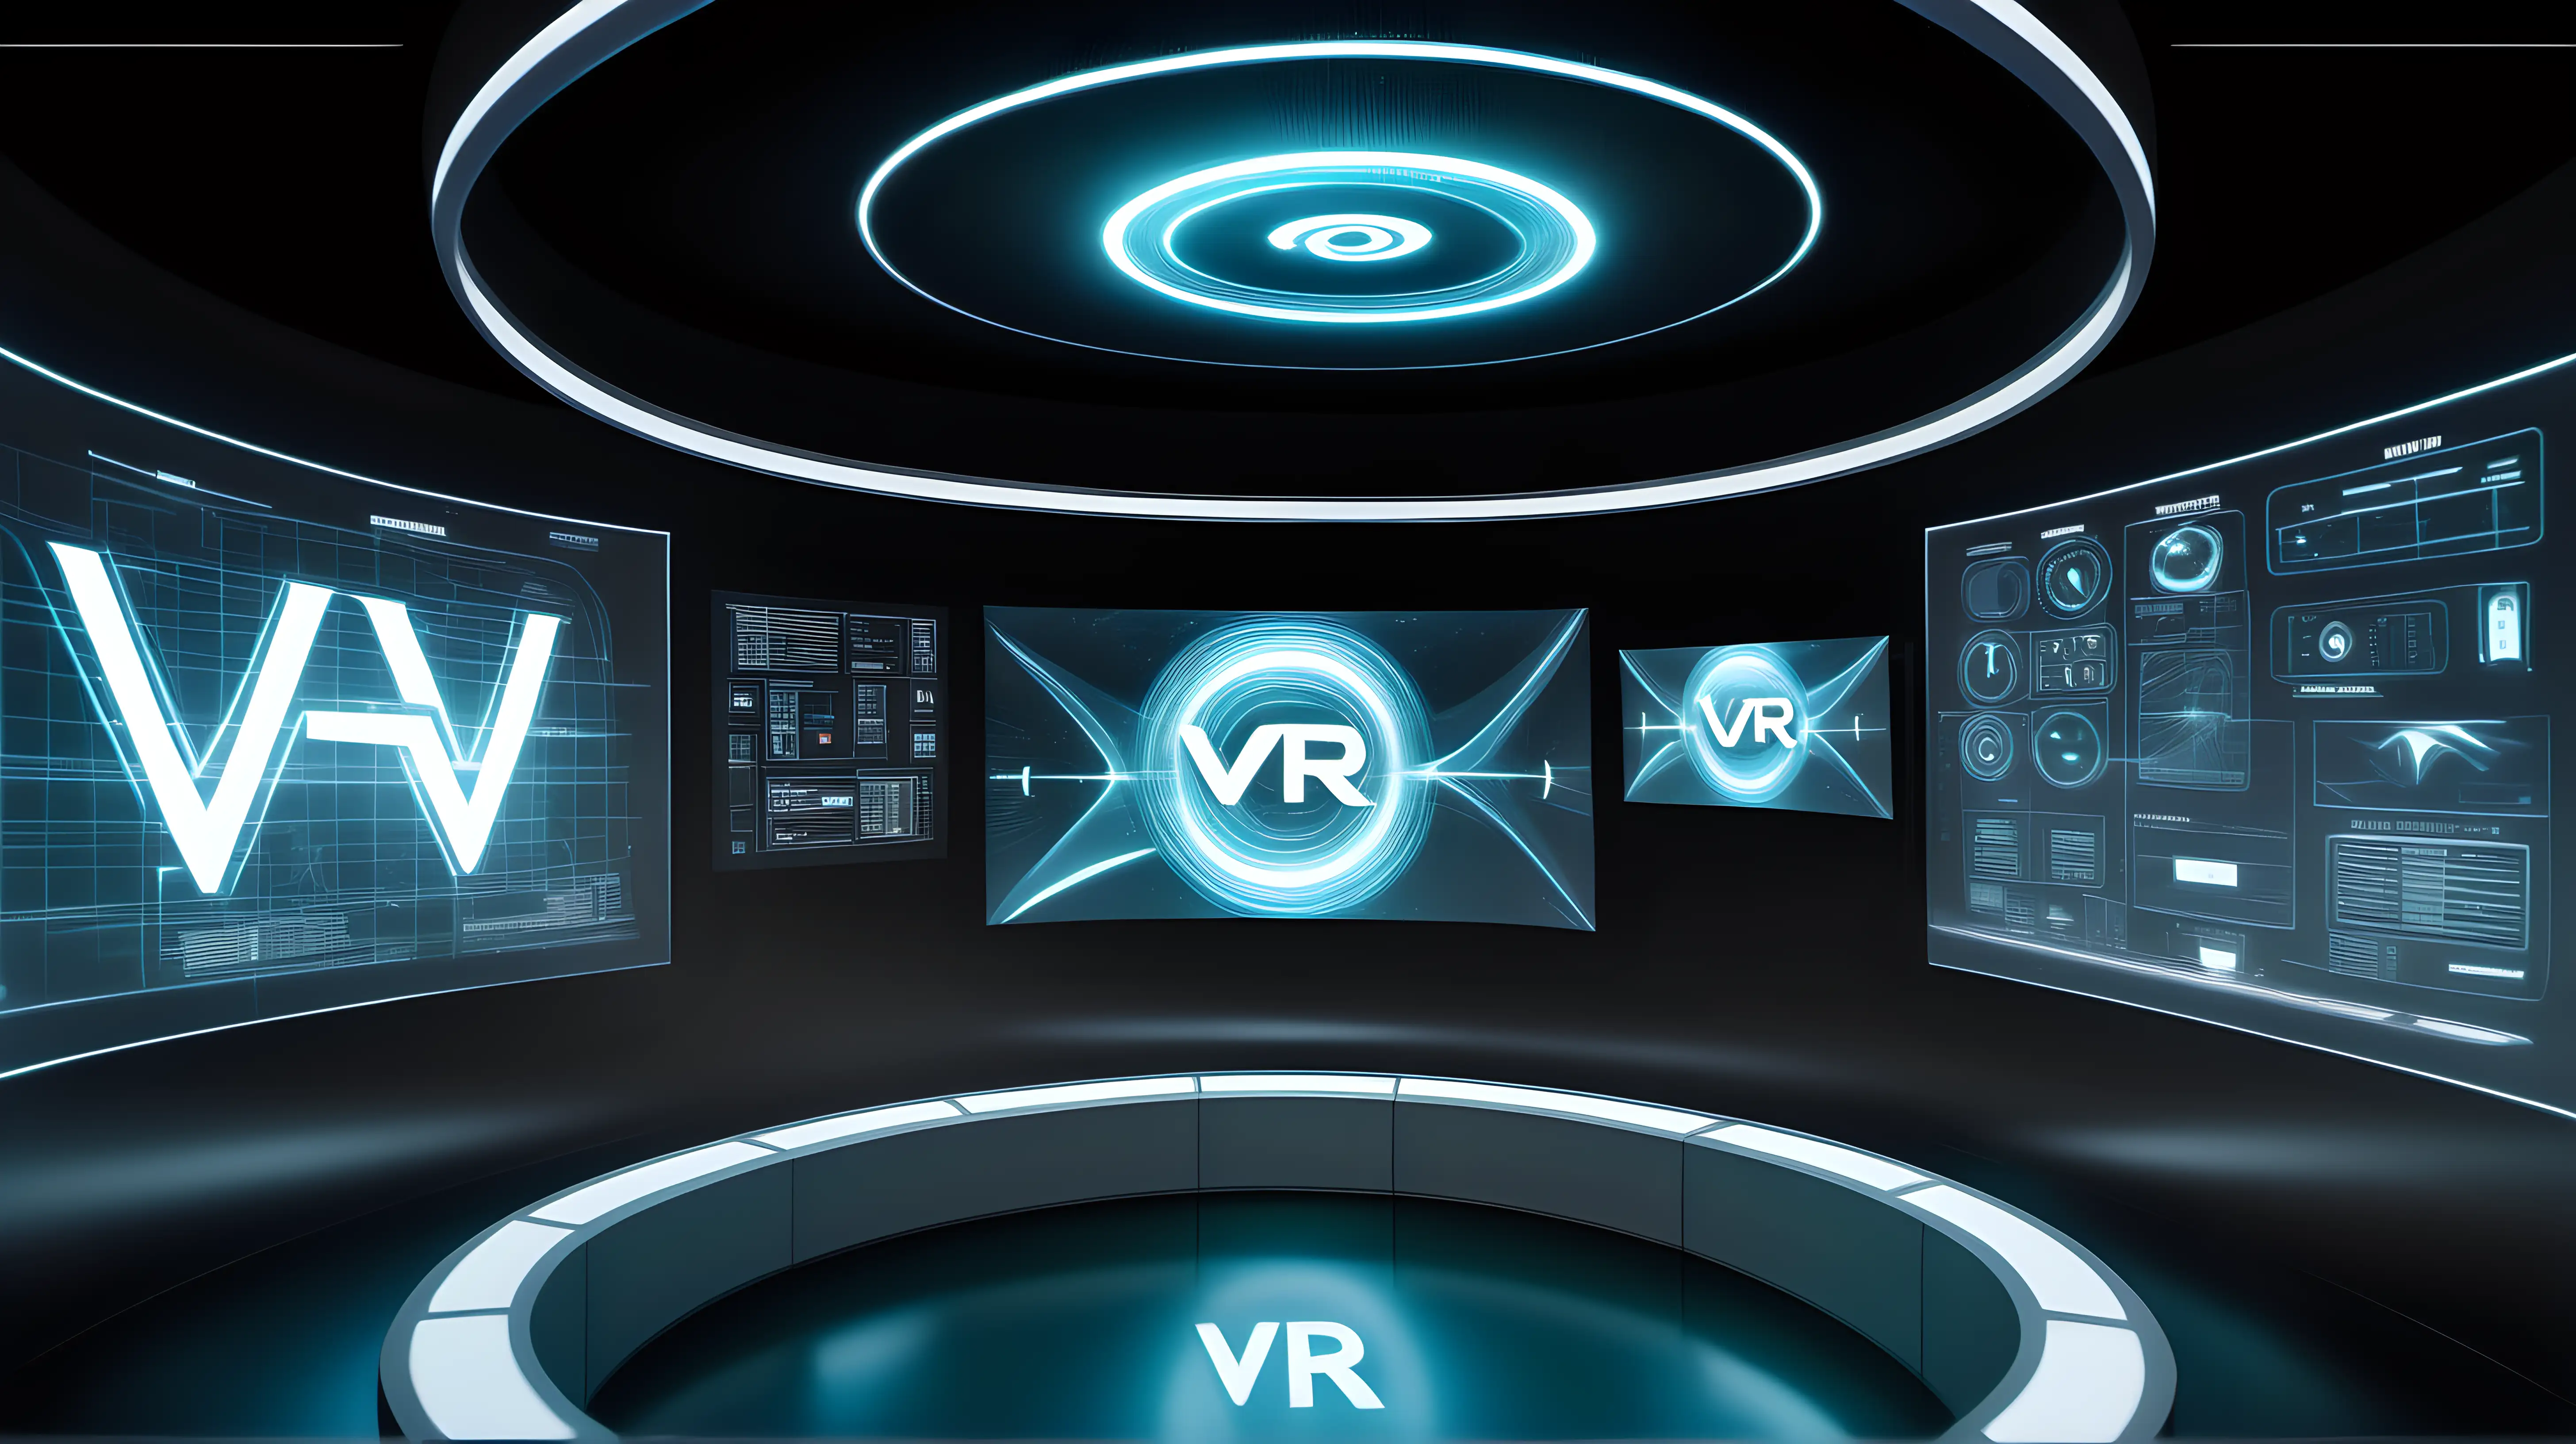 Futuristic VR Interface on Transparent Holographic Screen in Minimalist Control Room